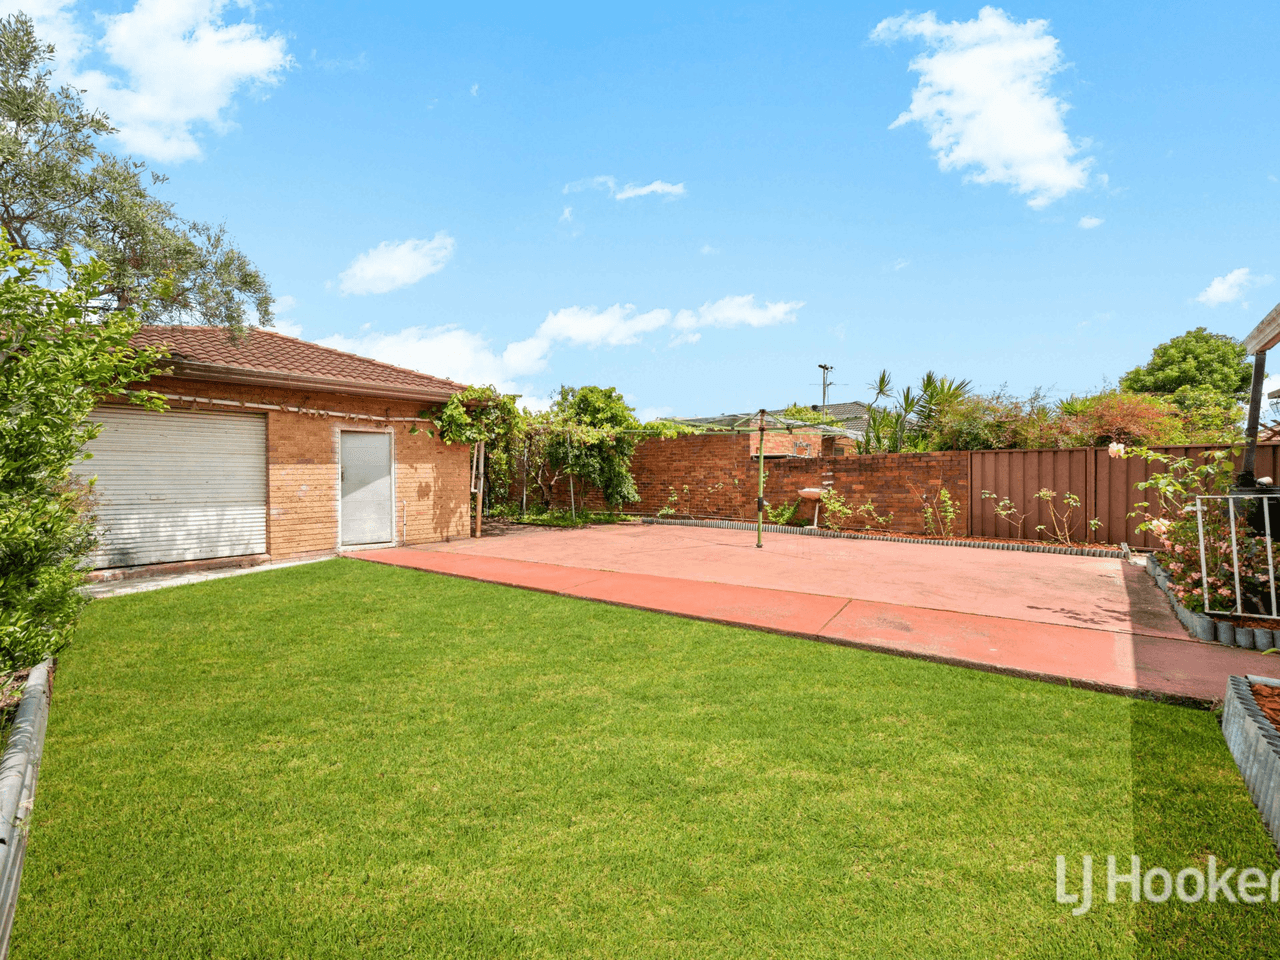 40 Osgood Street, GUILDFORD, NSW 2161